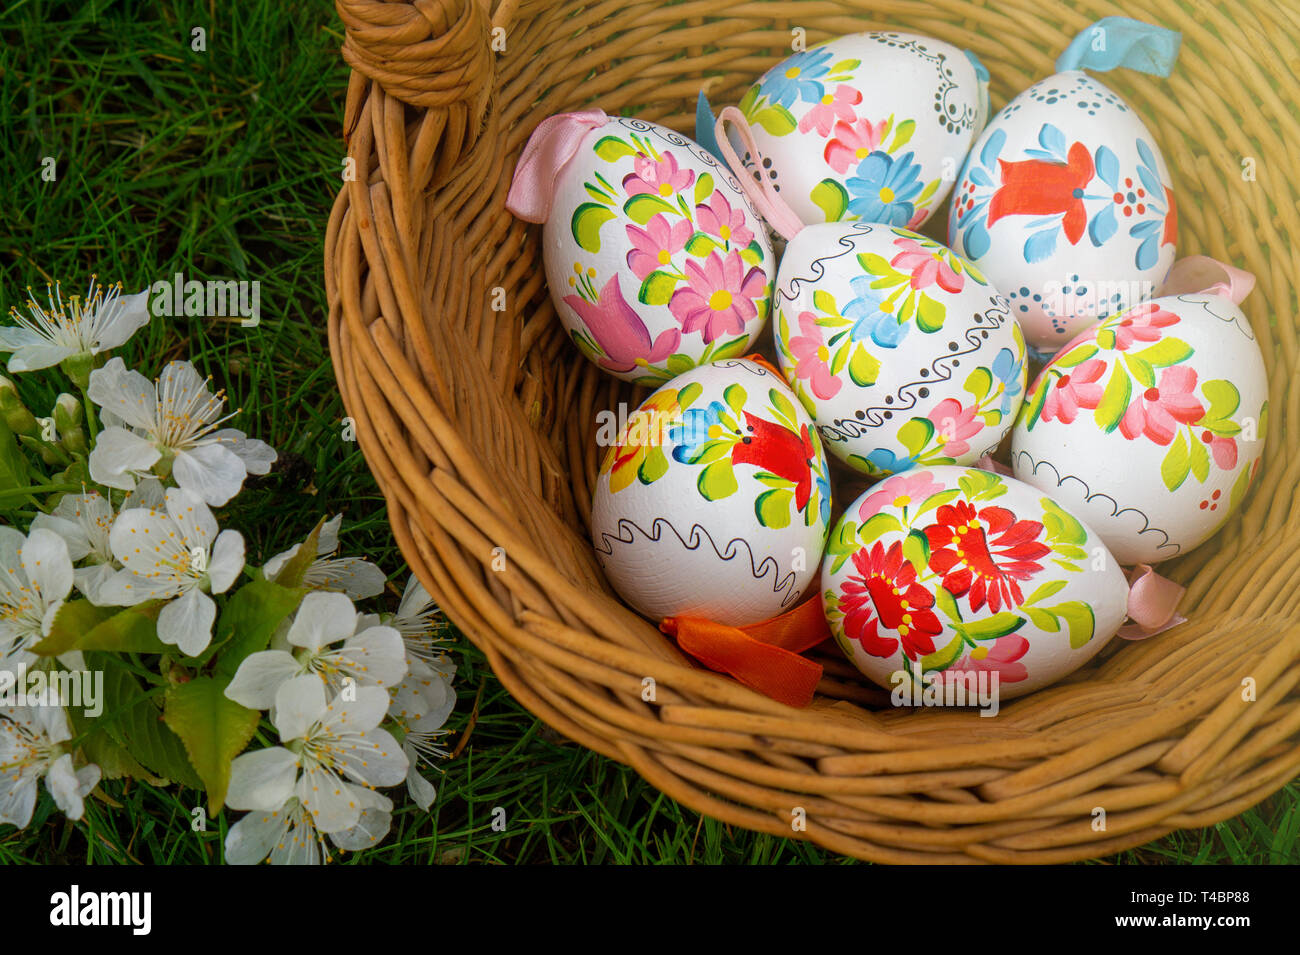 Close up of colorful decorted hand painted Easter eggs in a basket on grass with cherry bossom Stock Photo